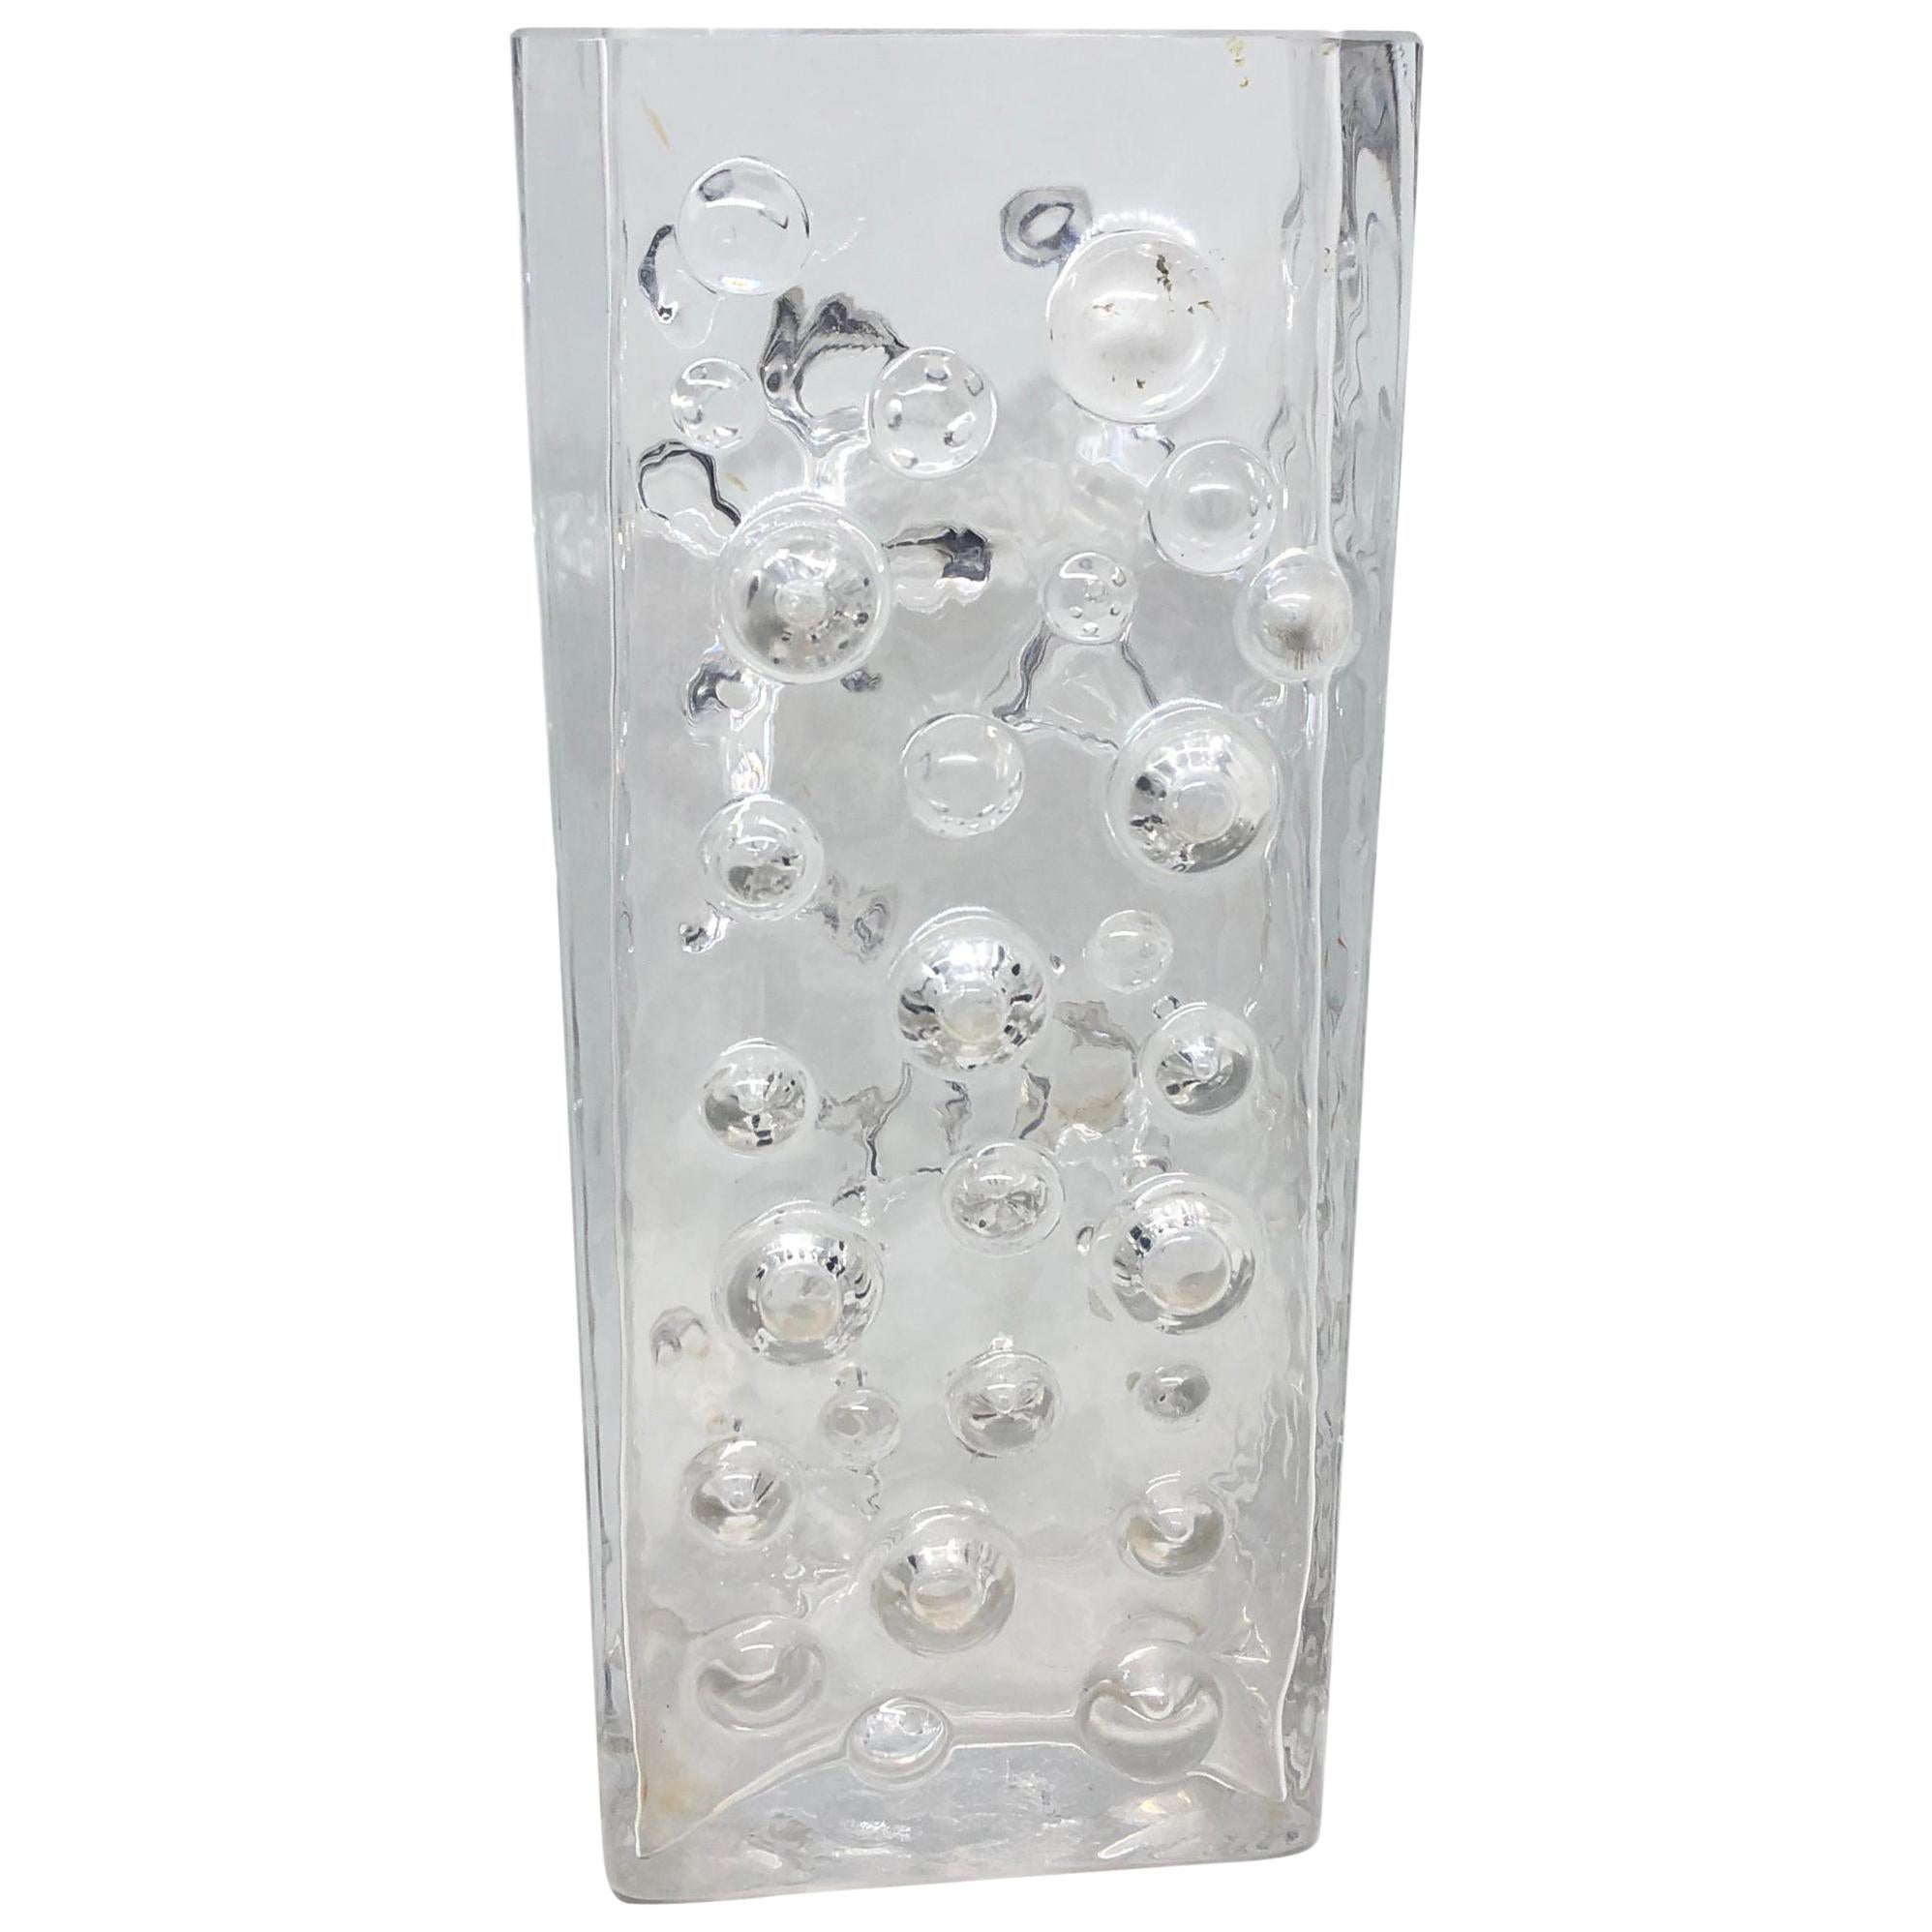 Rectangular Bubble Glass Vase by WMF Glas in Clear Color, circa 1970s